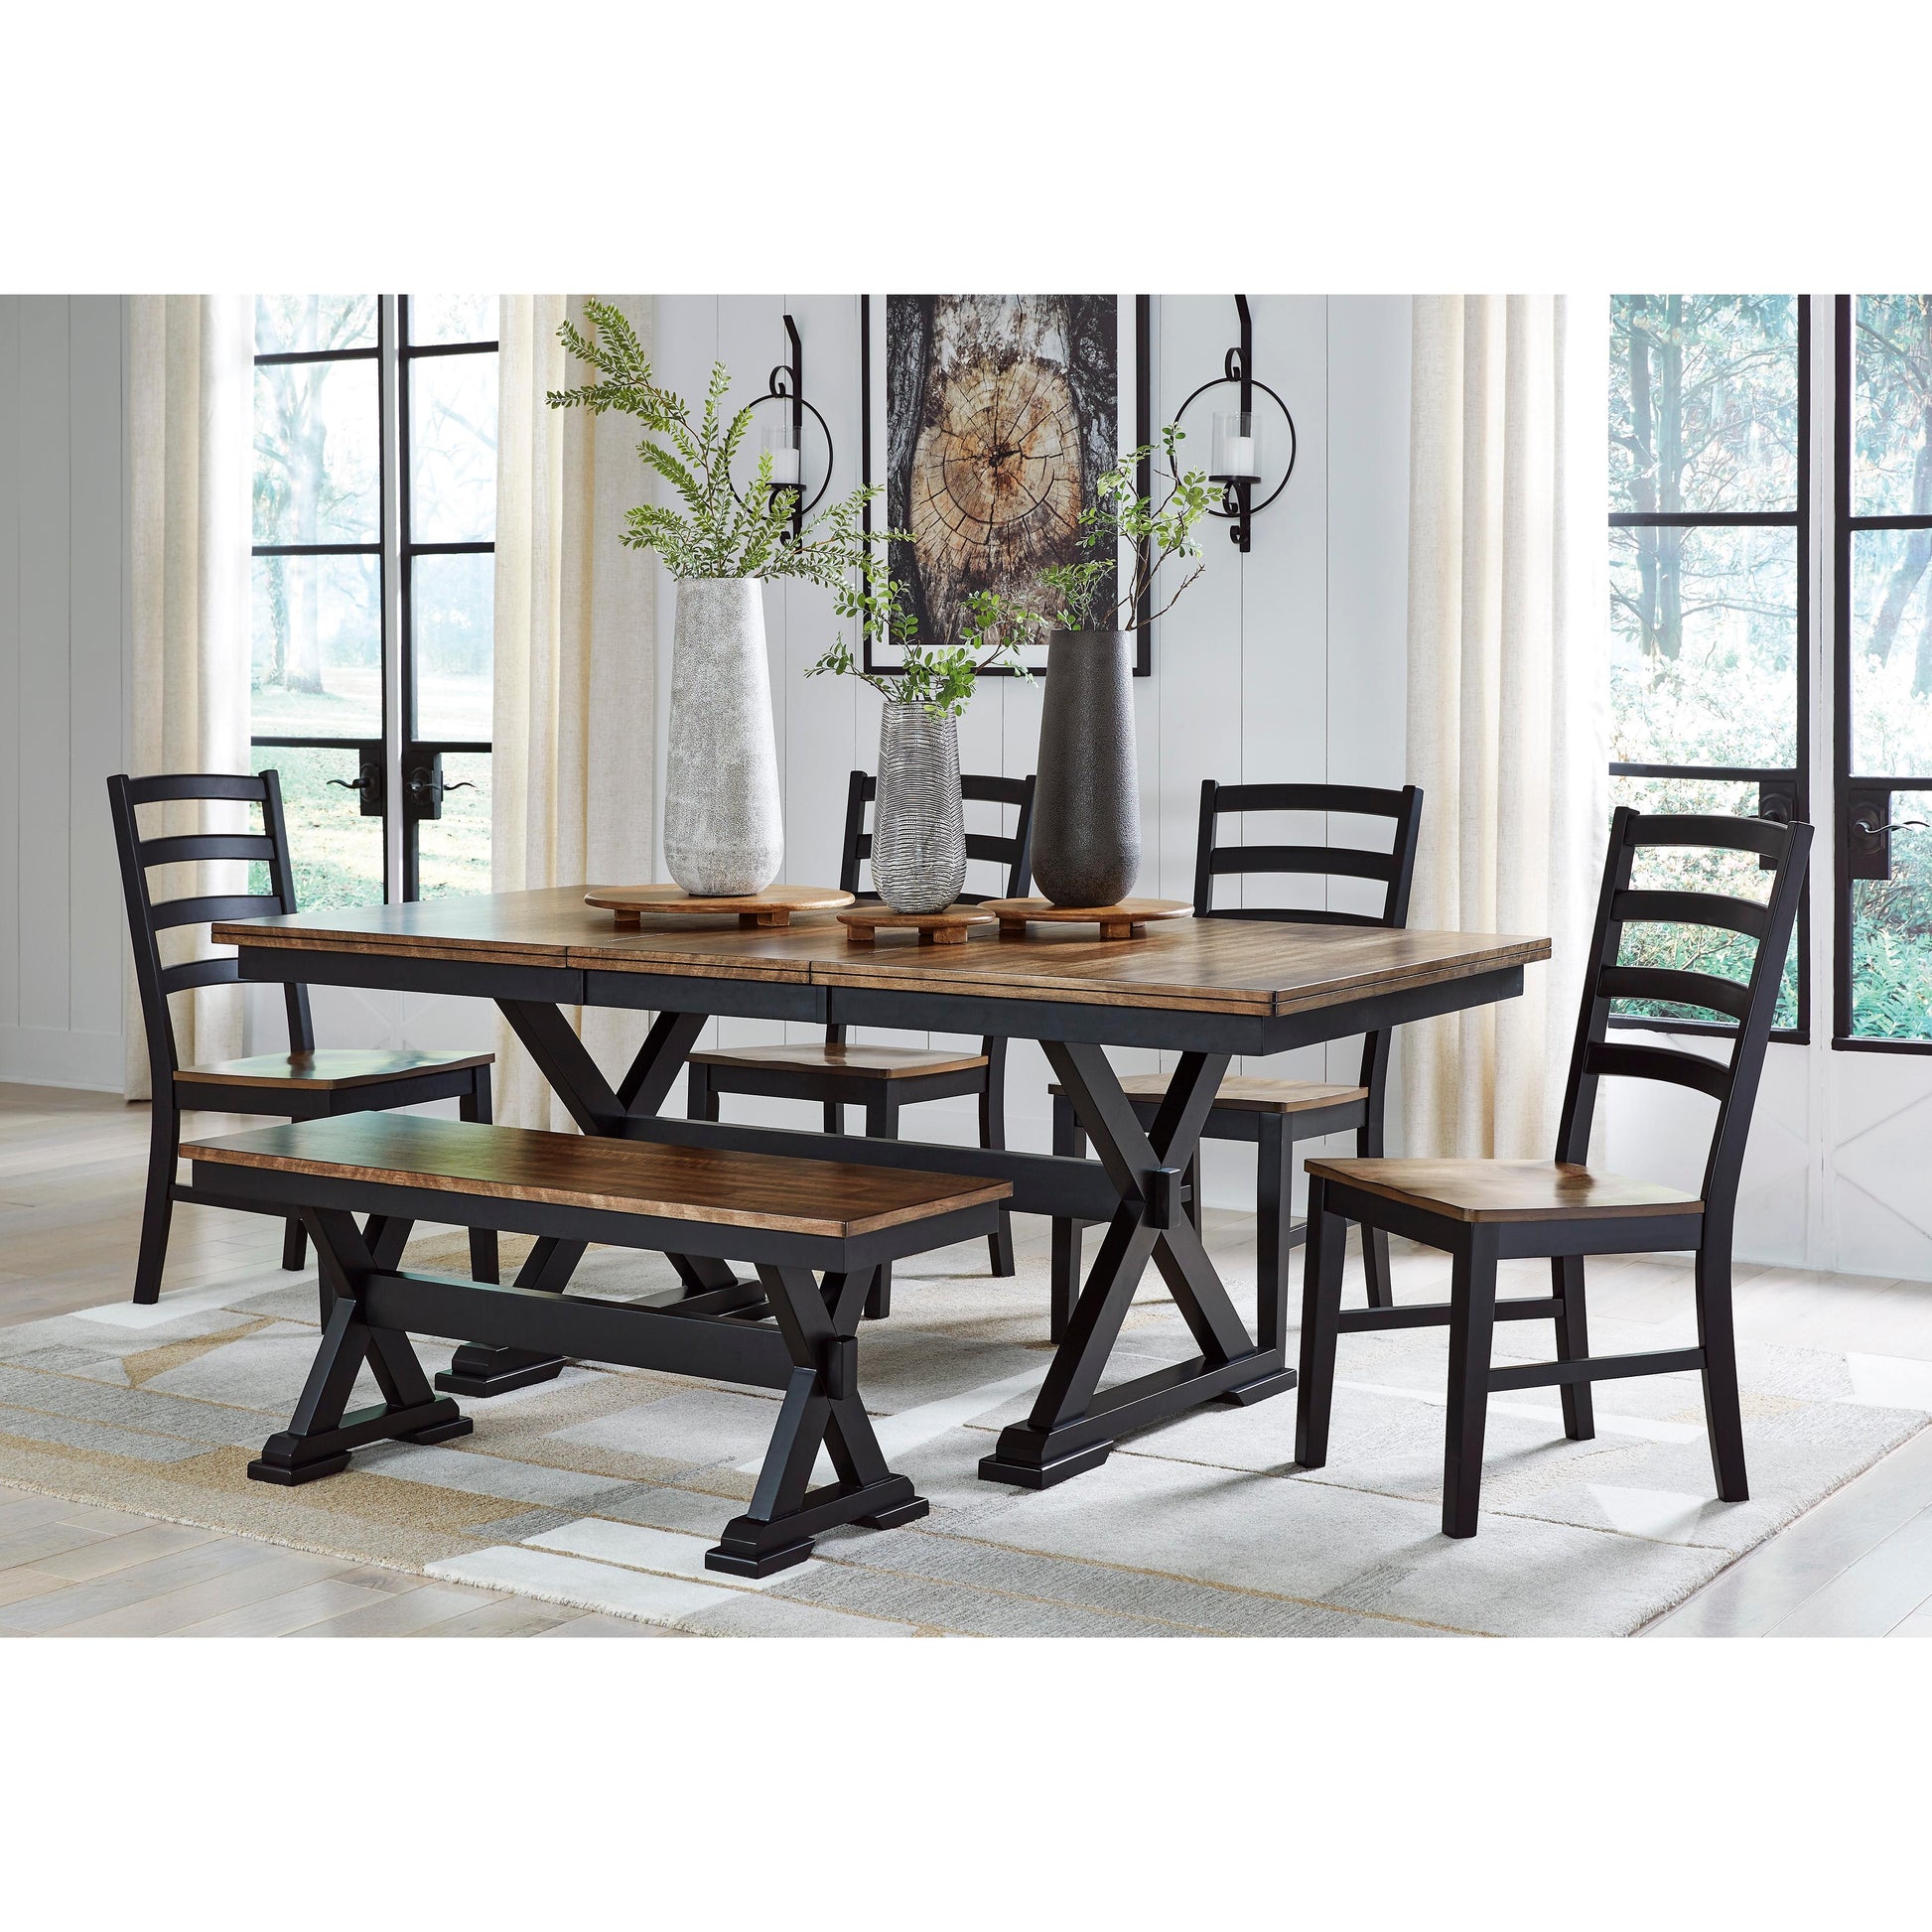 Signature Design by Ashley Wildenauer D634 6 pc Dining Set IMAGE 1